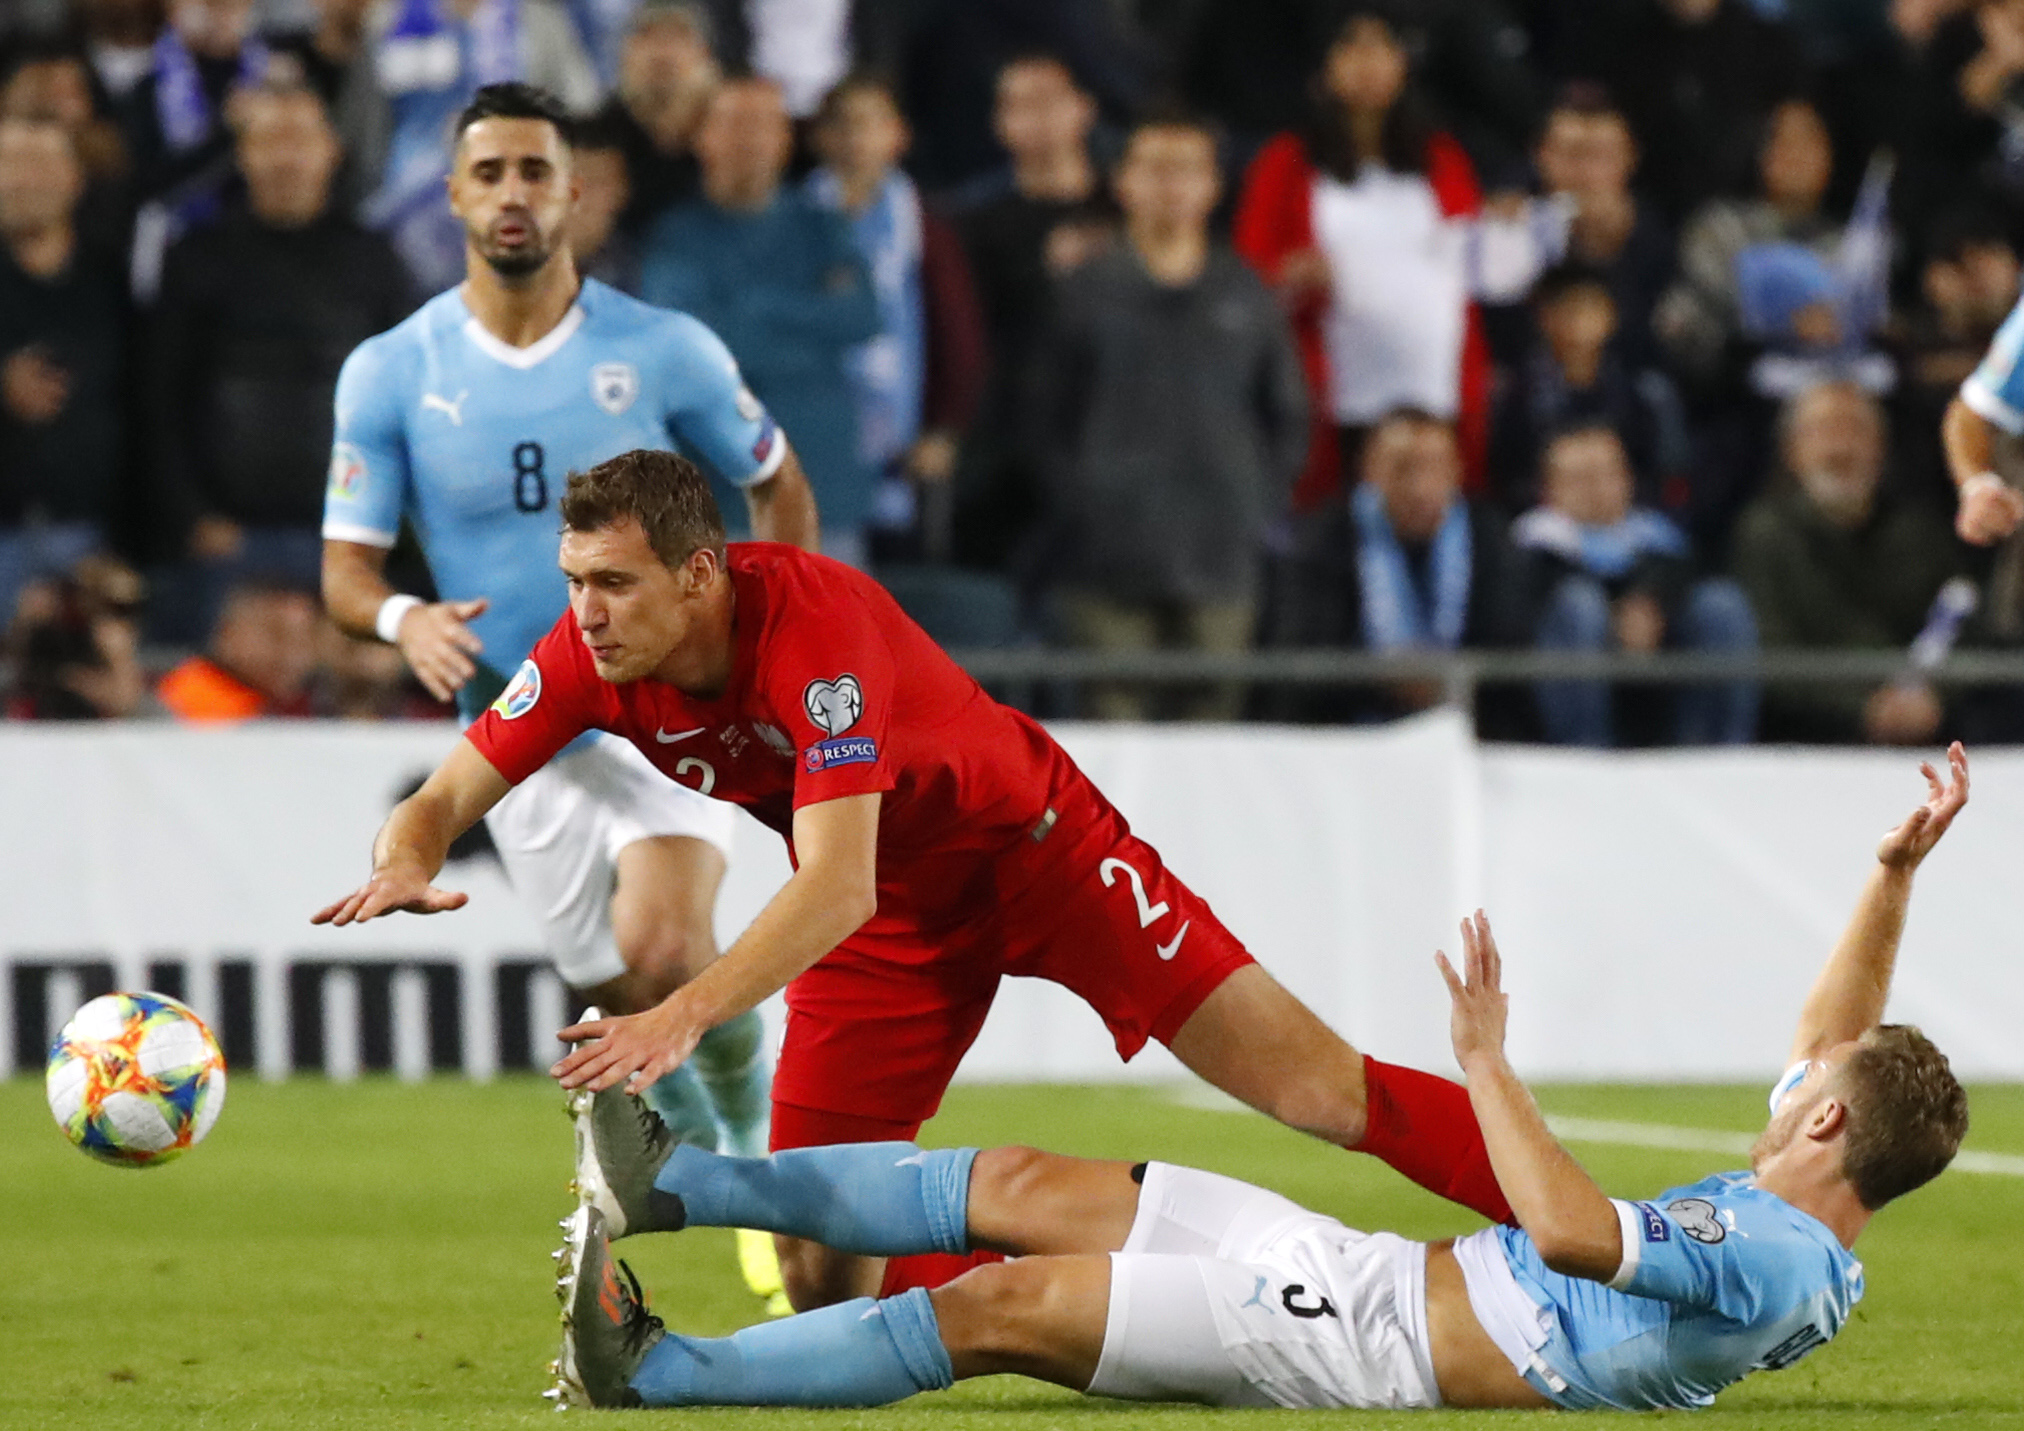 Poland's midfielder Krystian Bielik (C) falls over Israel's midfielder Dan Leon Glazer (bottom) as they vie for the ball during the EURO 2020 group G qualifiers football match between Israel and Poland at the Teddy stadium in Jerusalem on November 16, 2019.